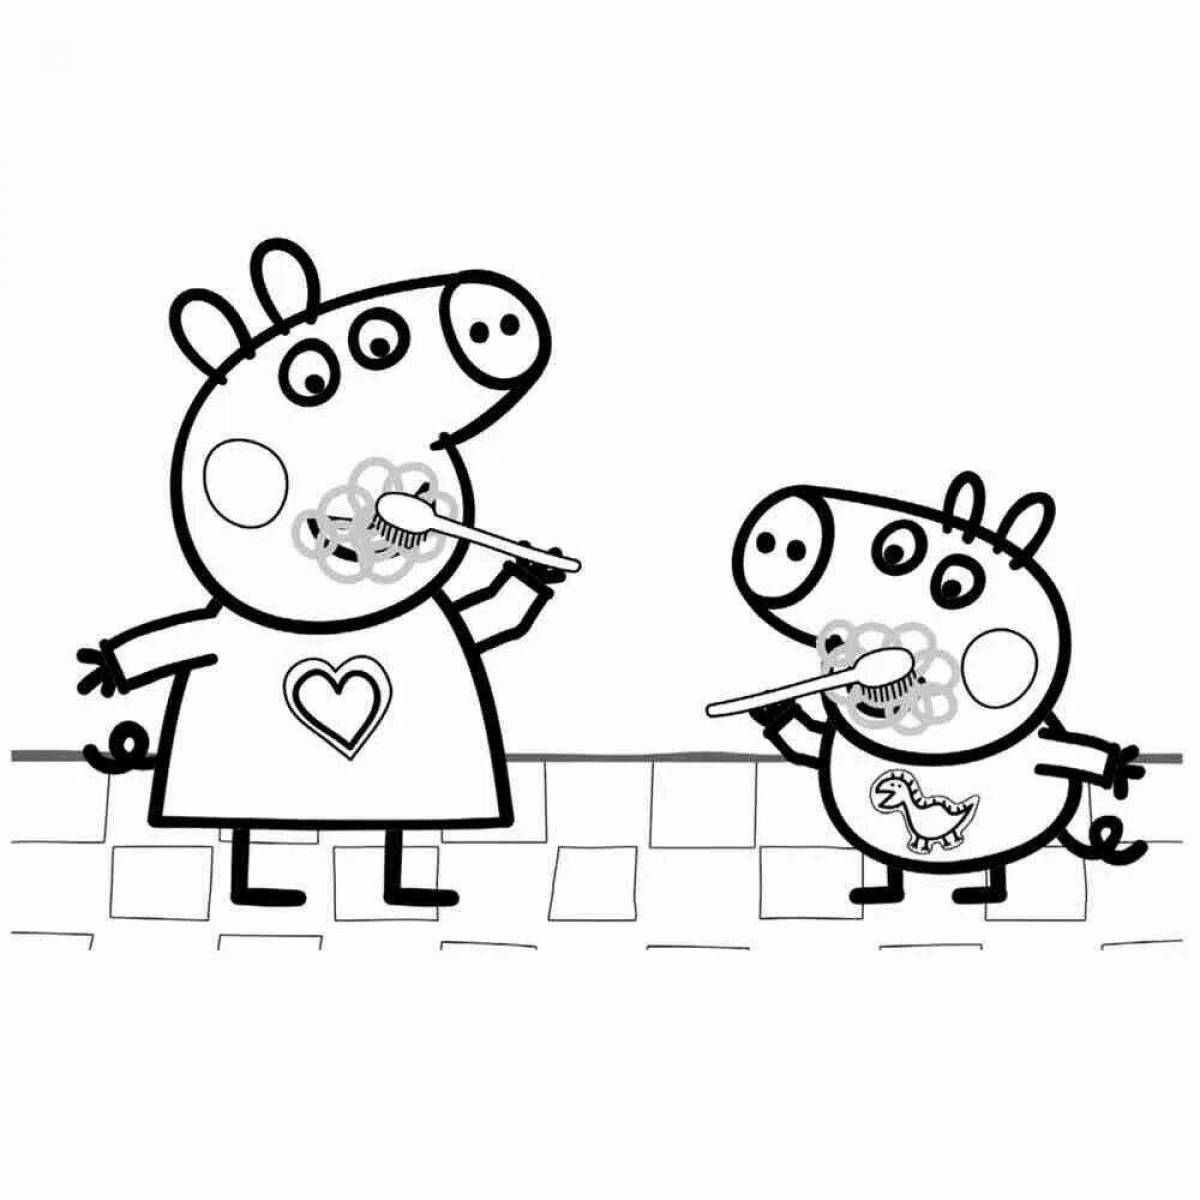 Glowing George and Peppa coloring page